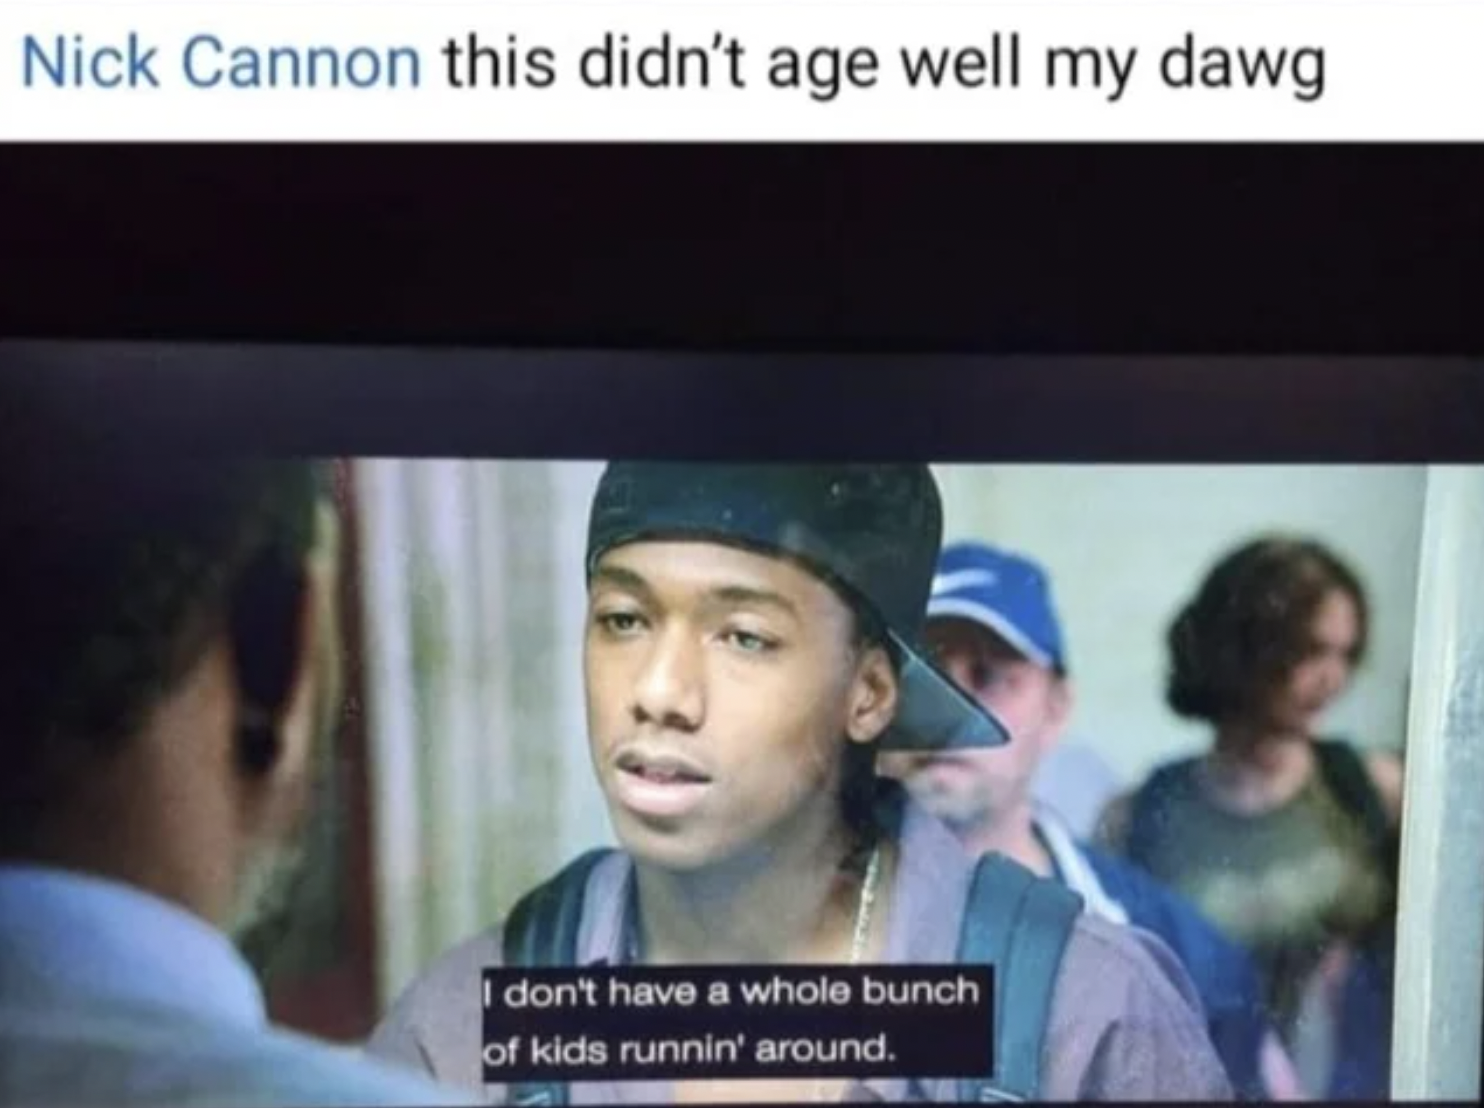 video - Nick Cannon this didn't age well my dawg I don't have a whole bunch of kids runnin' around.